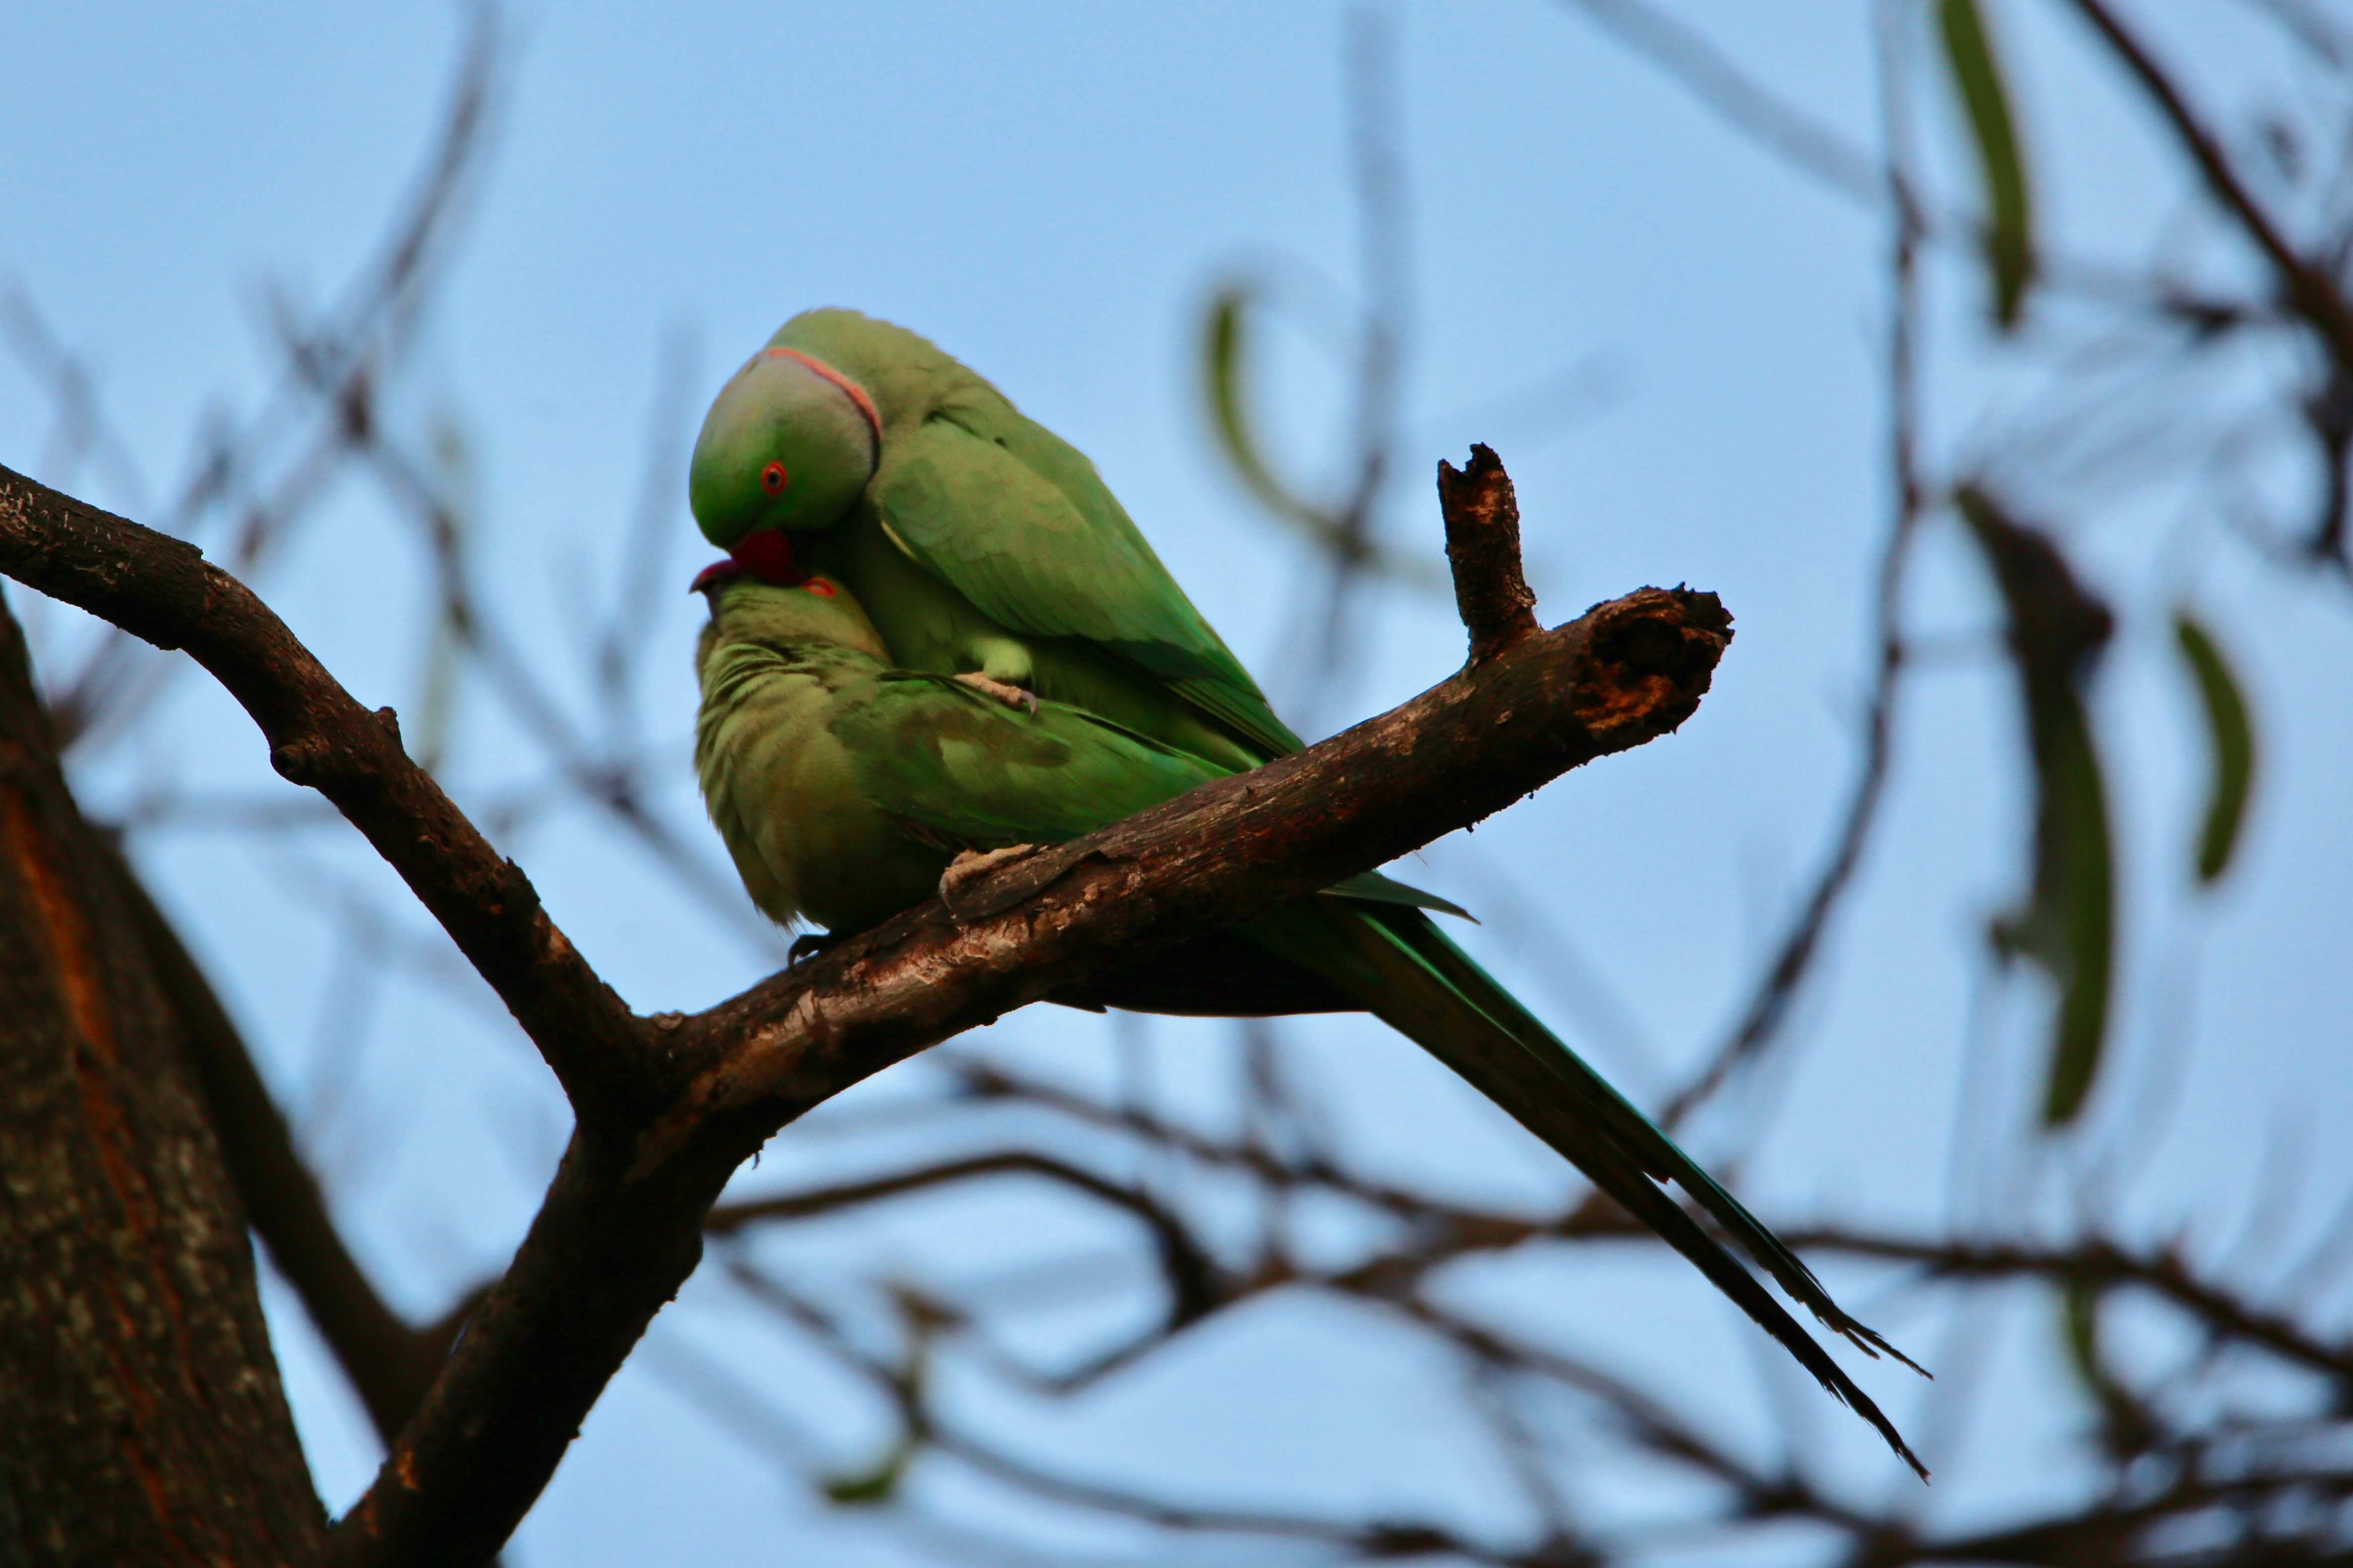 Rose-Ringed Parakeets Courting and Mating high resolution images free